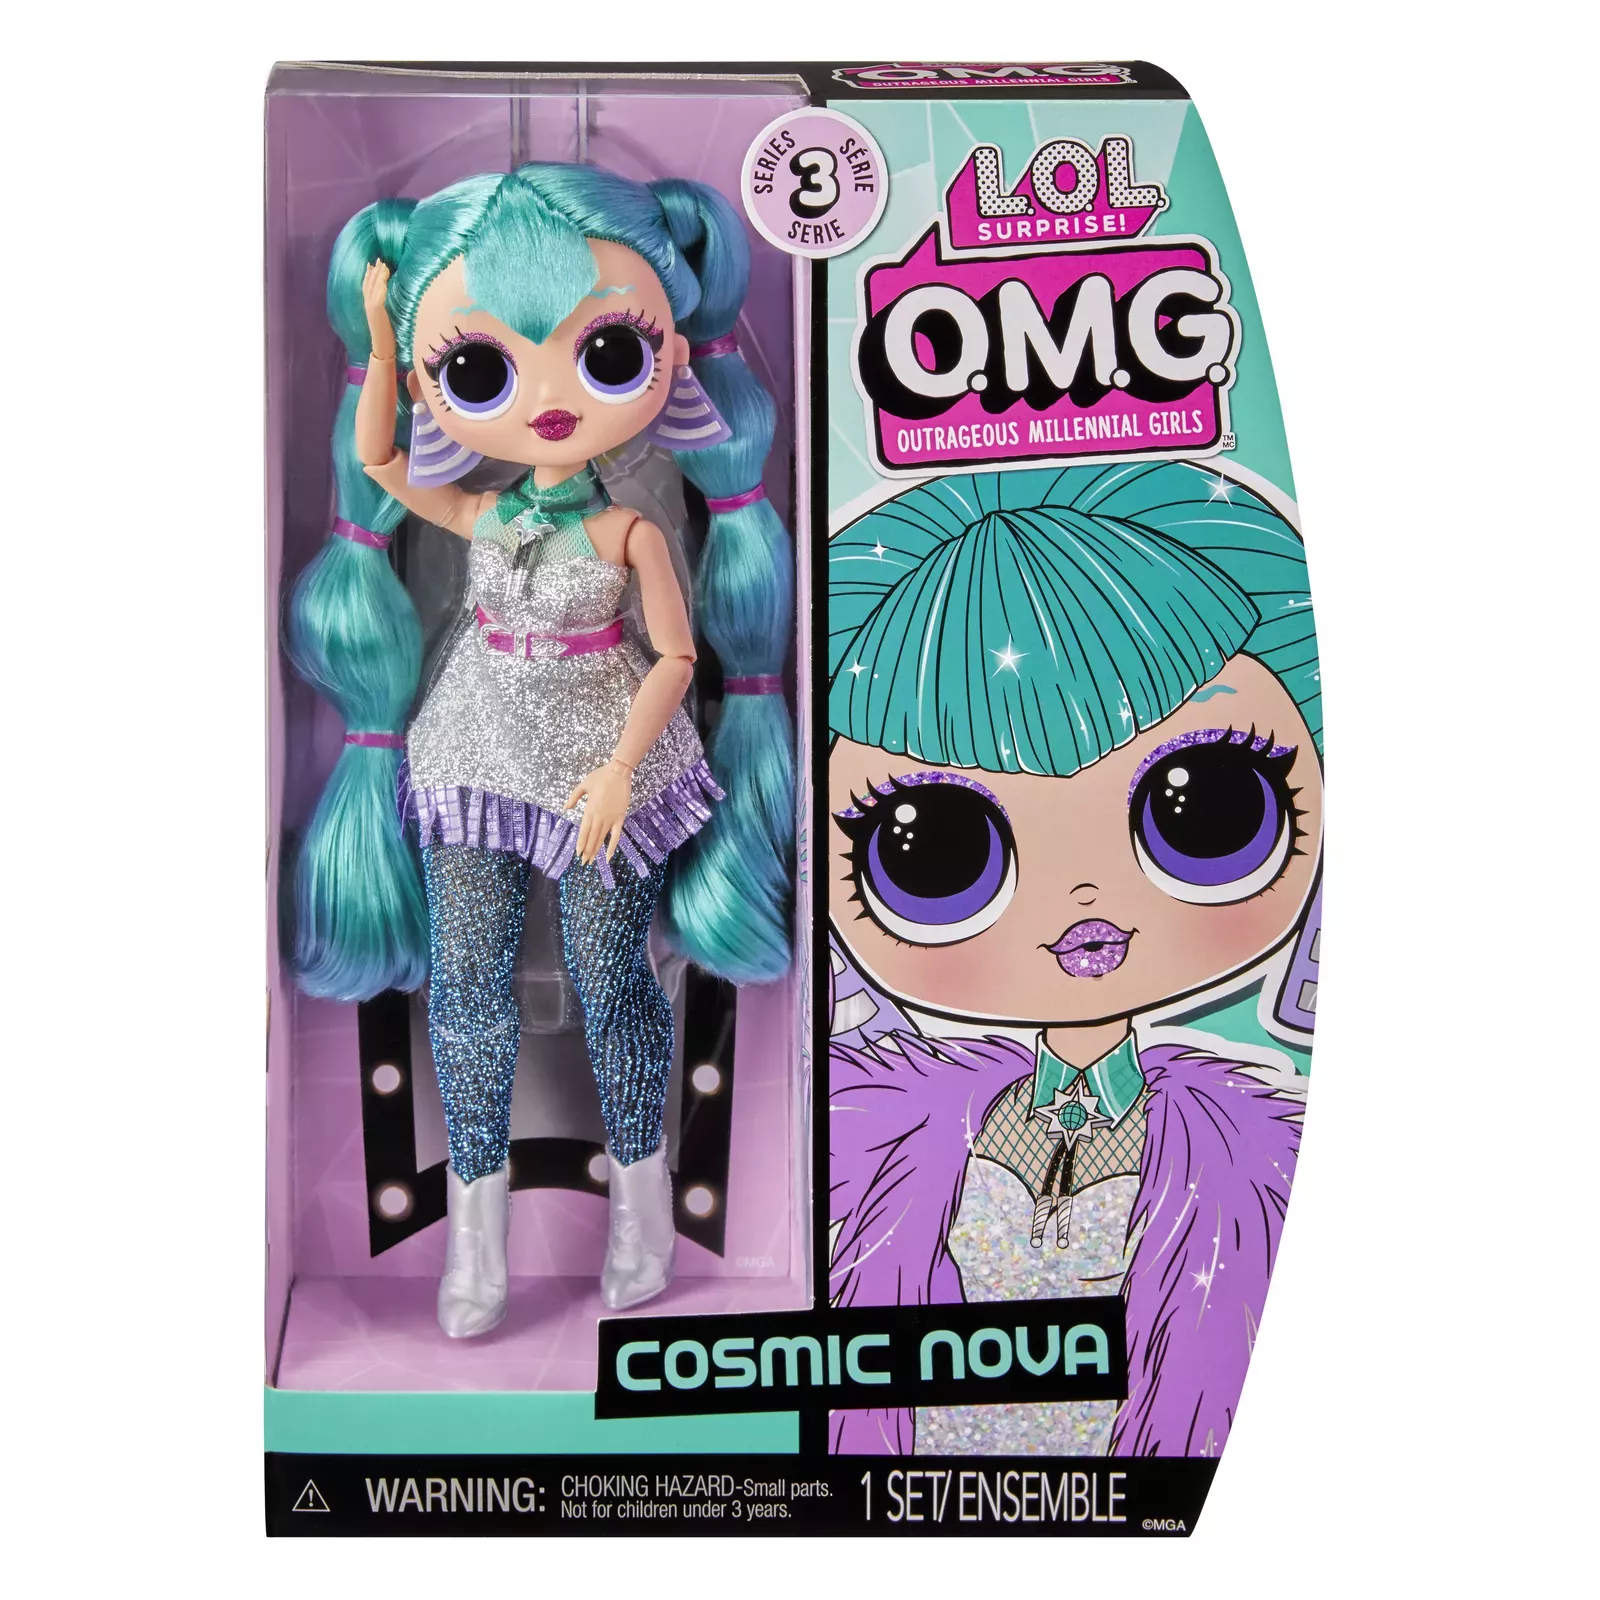 Toy L.O.L. Surprise OMG HoS Doll S3 - Groovy Babe, Posters, Gifts,  Merchandise